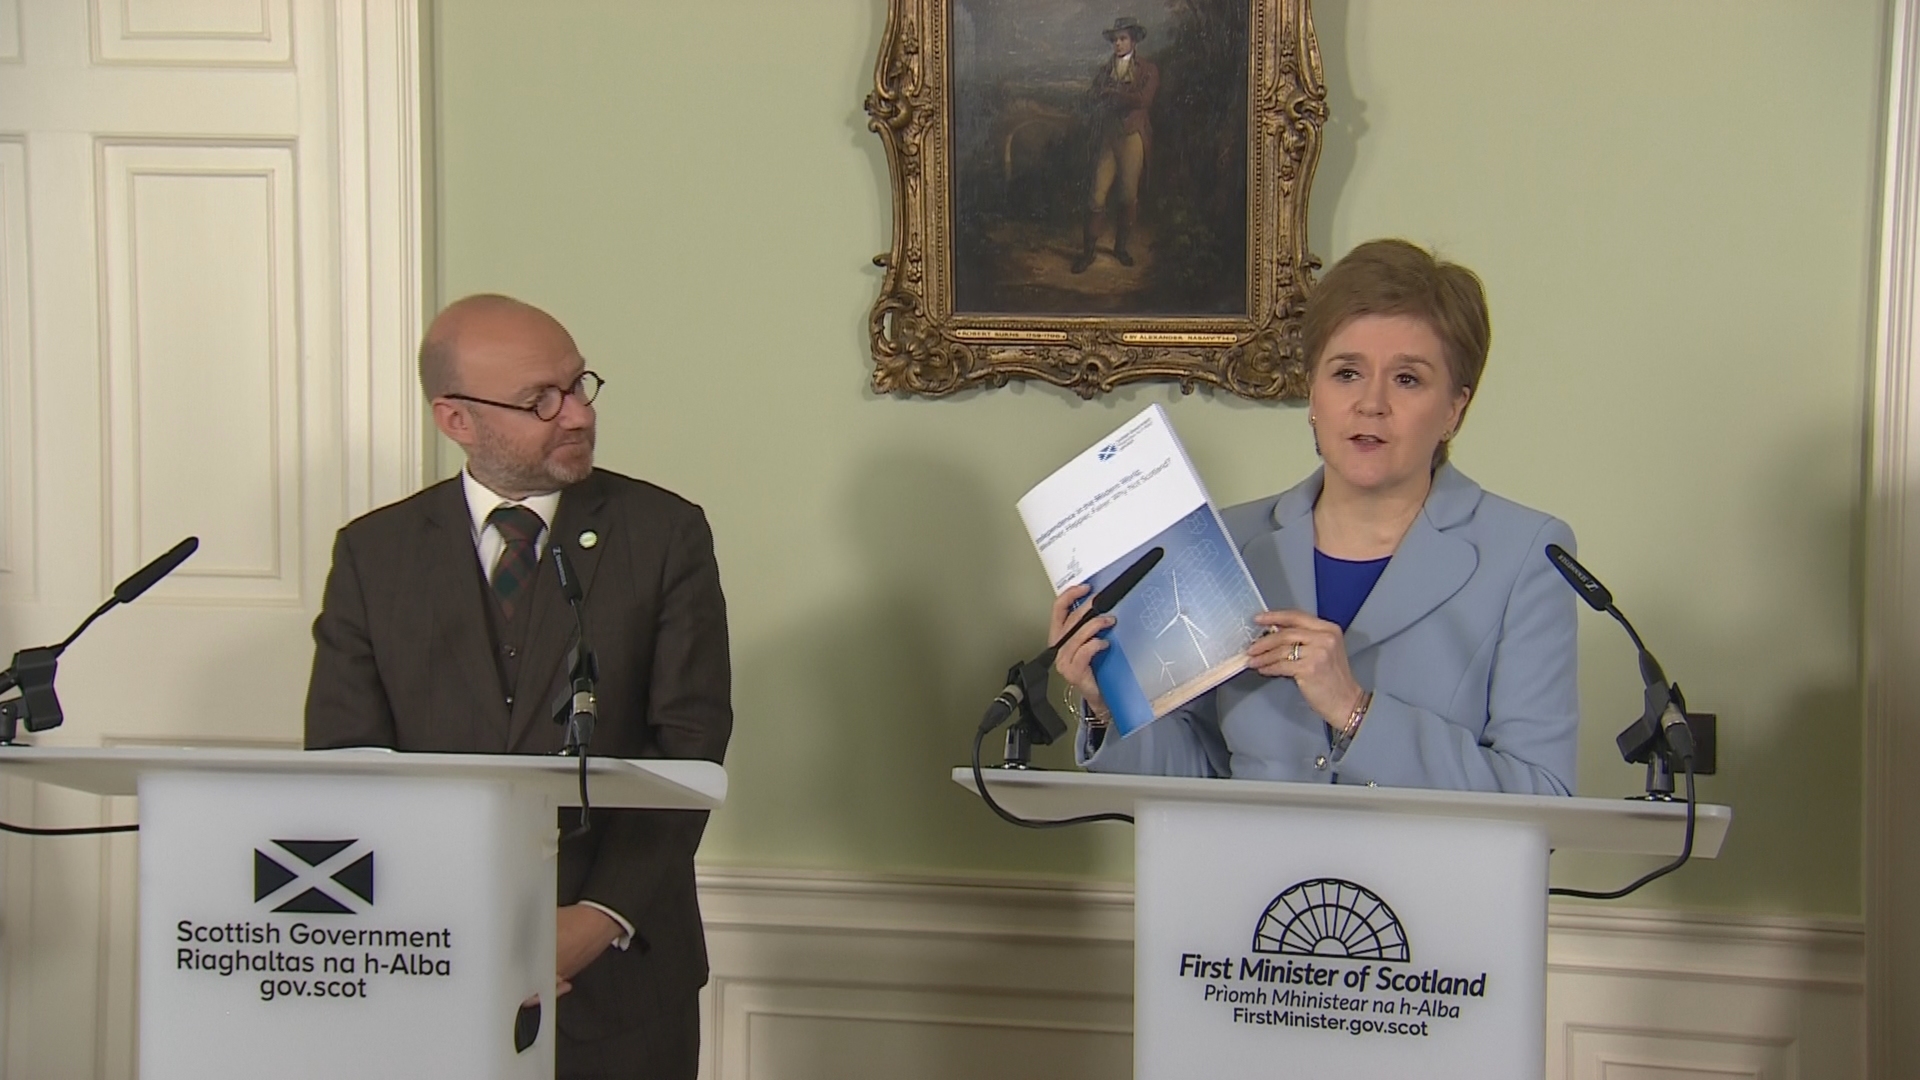 Nicola Sturgeon and Patrick Harvie signed the Bute House Agreement in 2021.